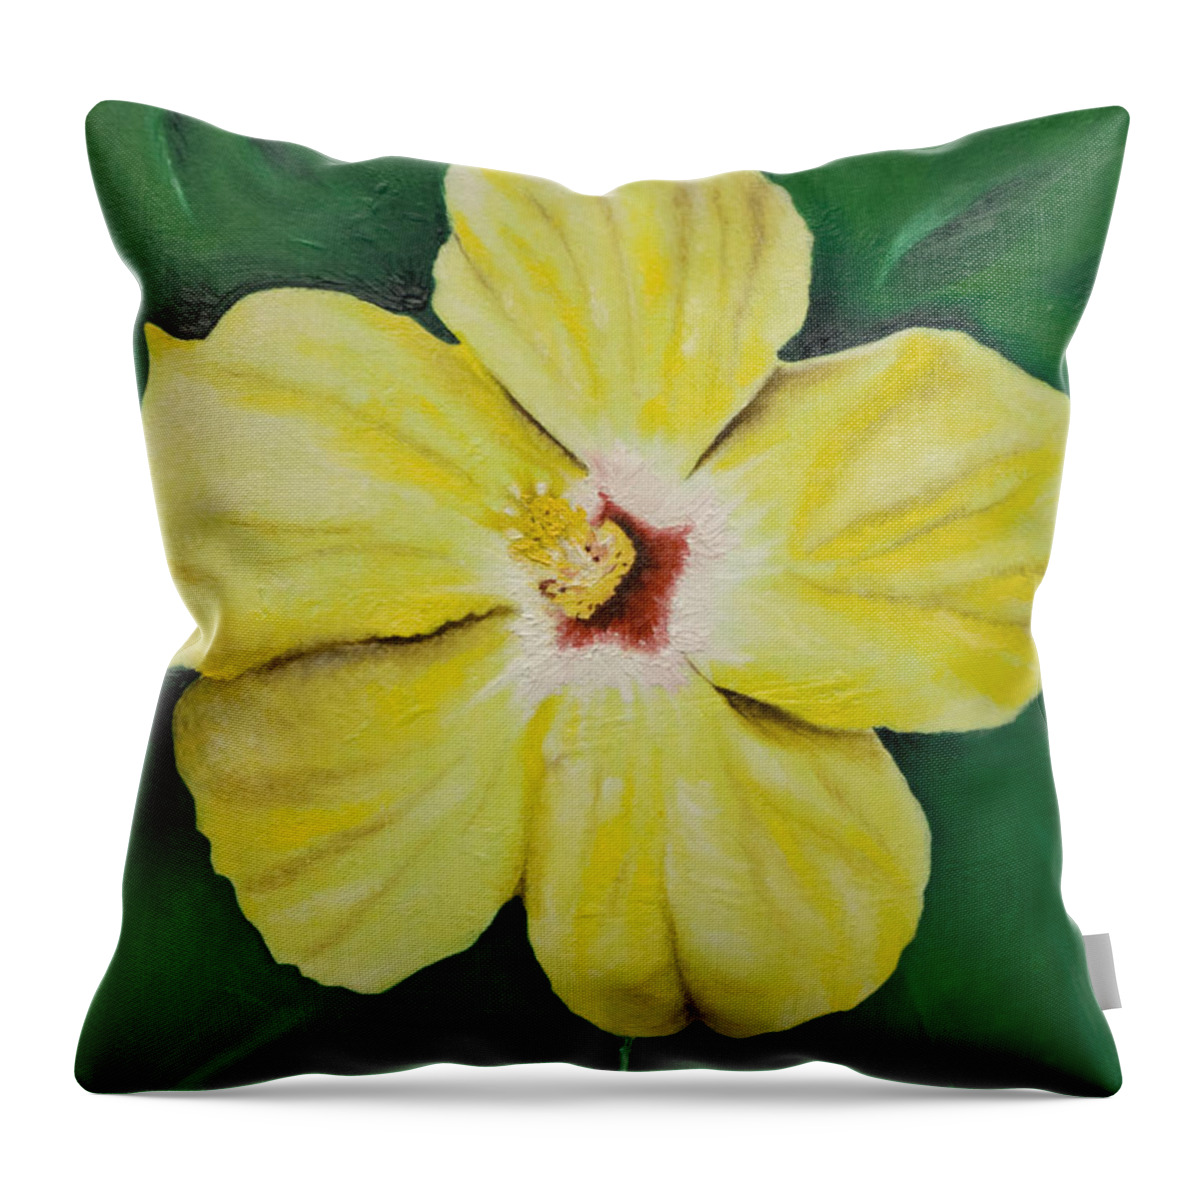 Observational Art Throw Pillow featuring the painting Yellow Hibiscus by Stephen J DiRienzo